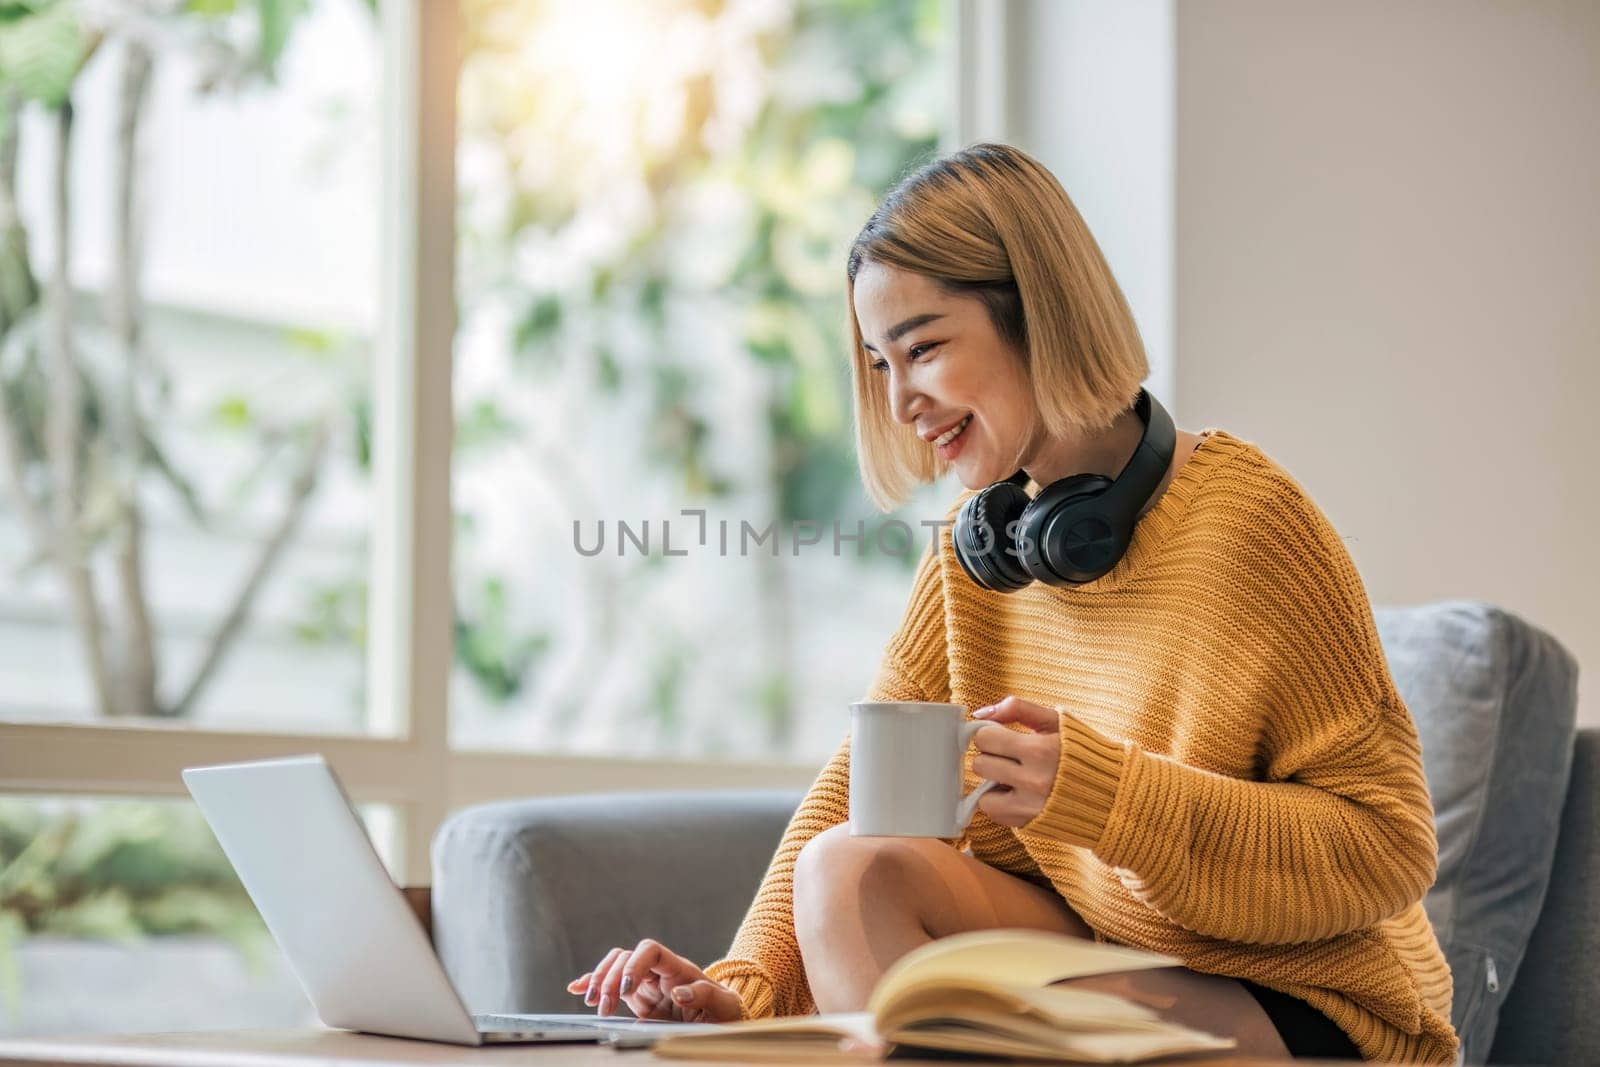 young asian woman student with headphones using laptop in a video call or online class while sitting on sofa at home.